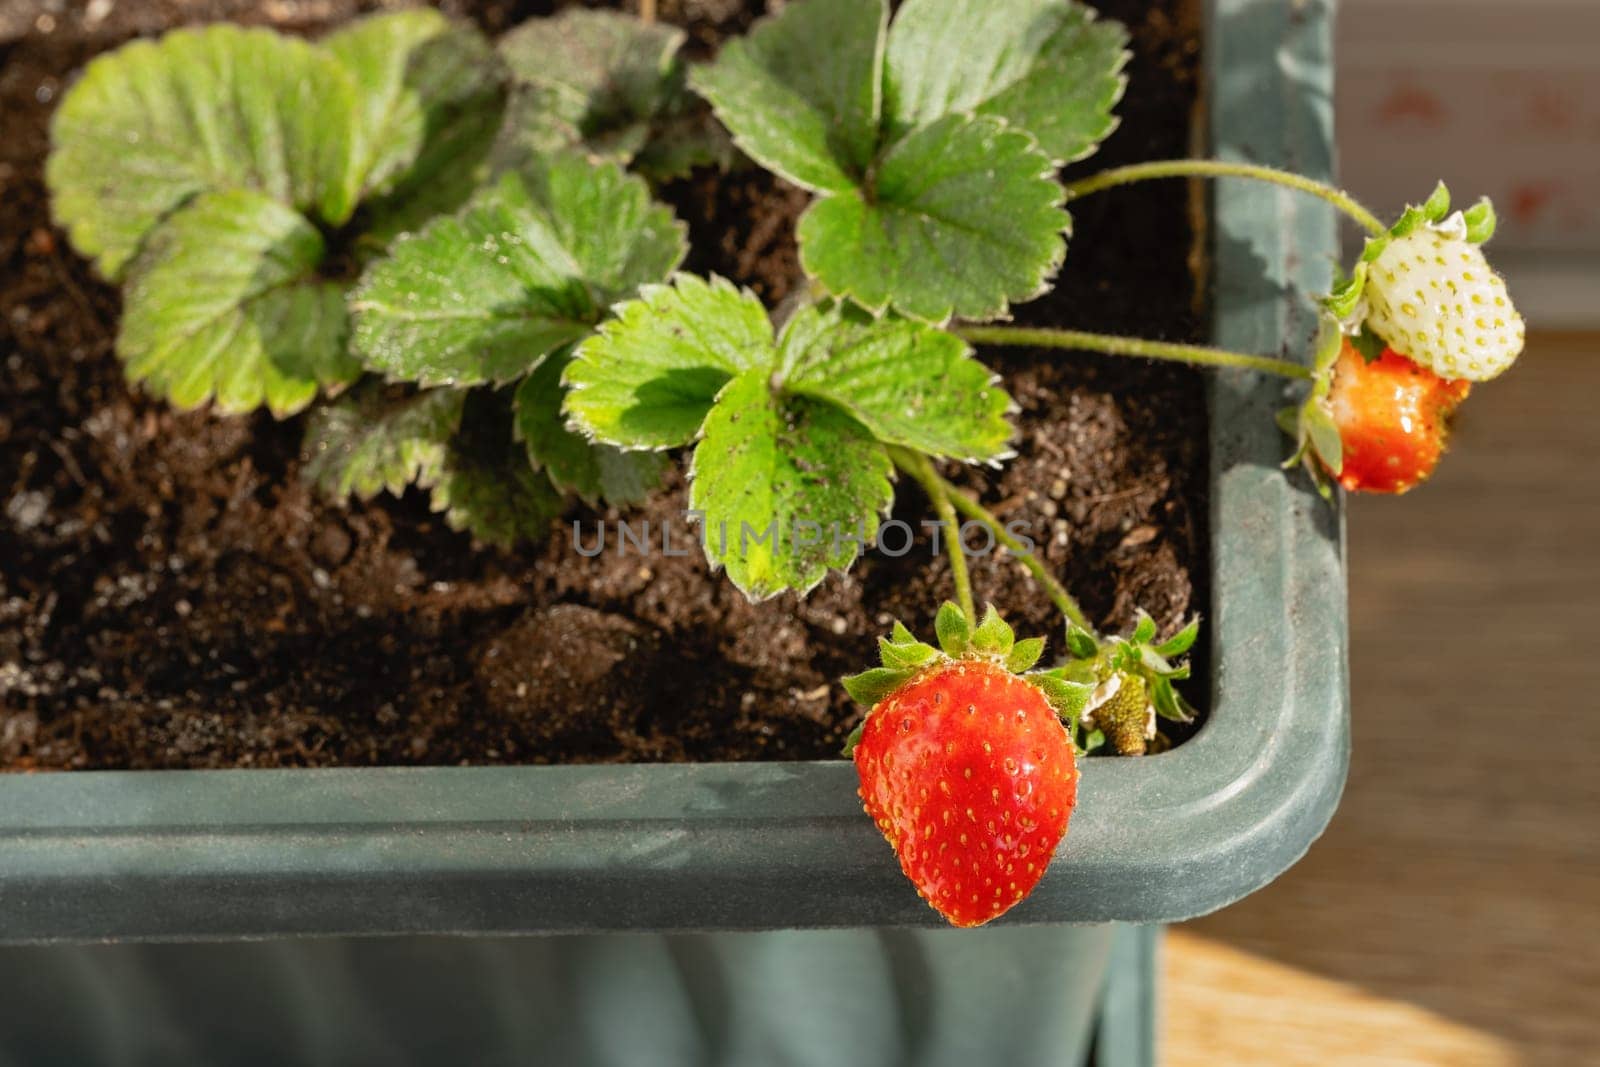 Strawberry plant with ripe fruits in a plastic pot on the apartment window.